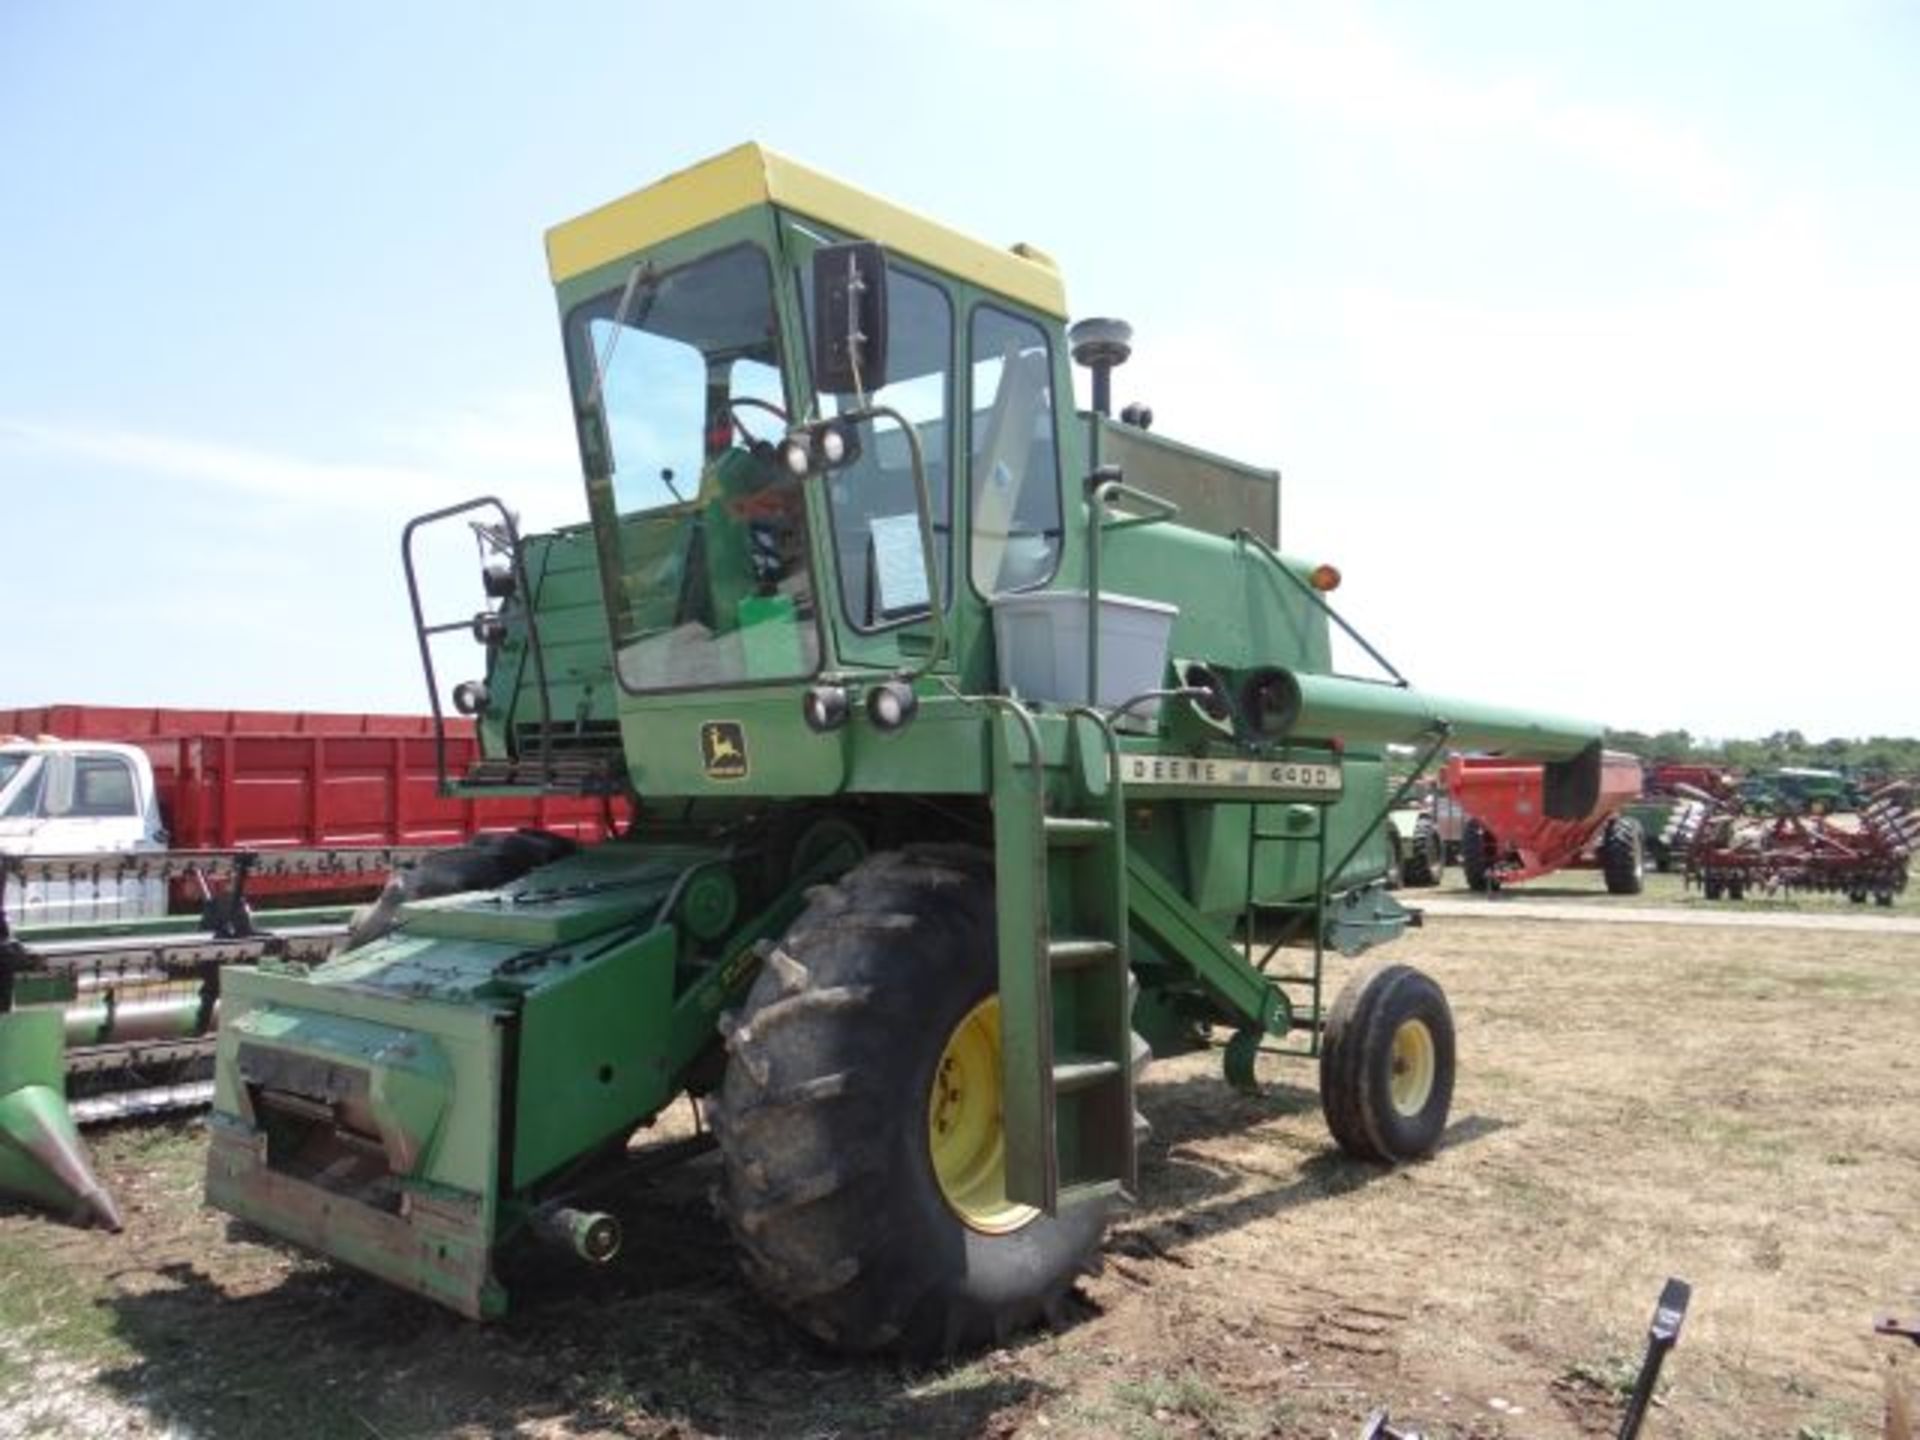 JD 4400 Combine, 1979 Less than 3000 hrs, Diesel, 2wd, Chopper, Lots of New Parts, Runs and Works